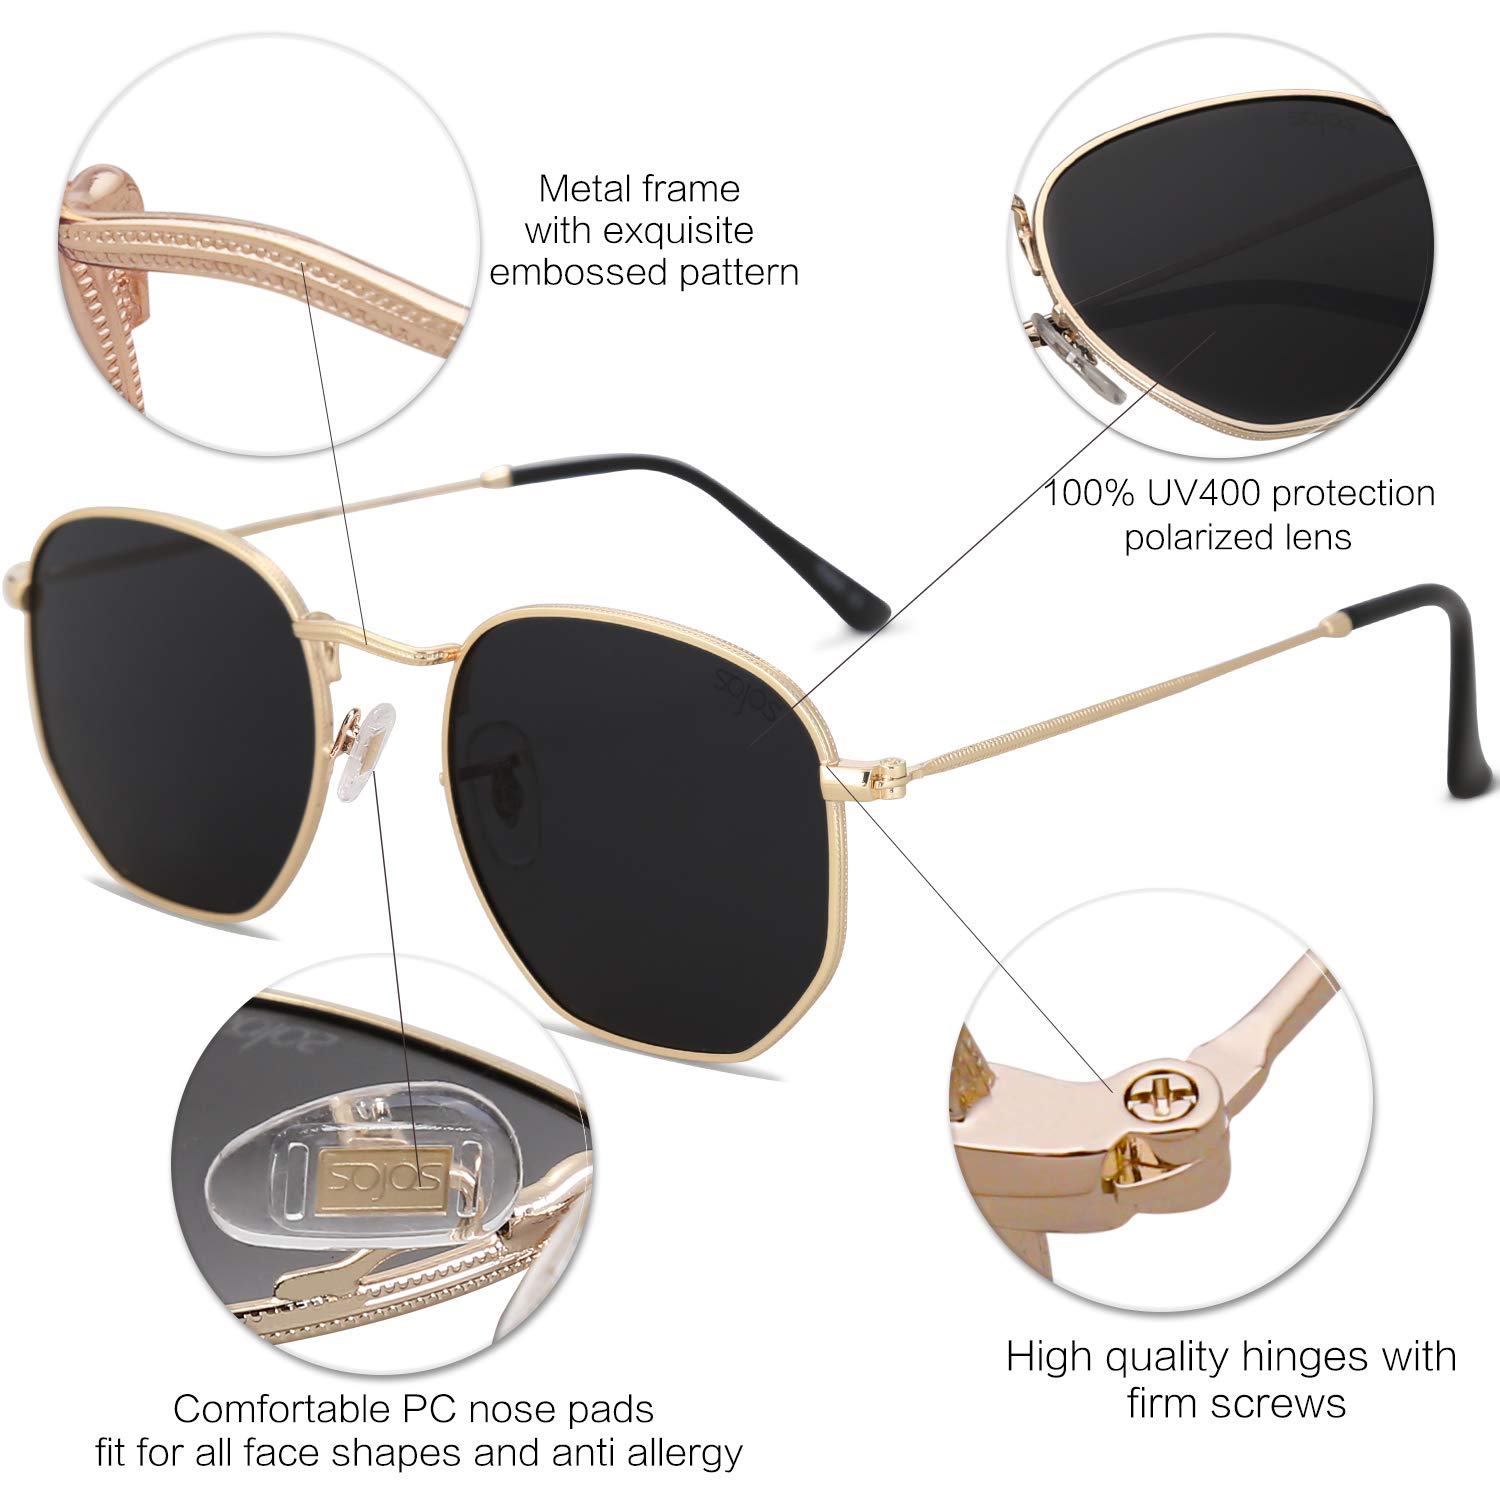 SOJOS Small Square Polarized Sunglasses for Men and Women, Gold, Size ...